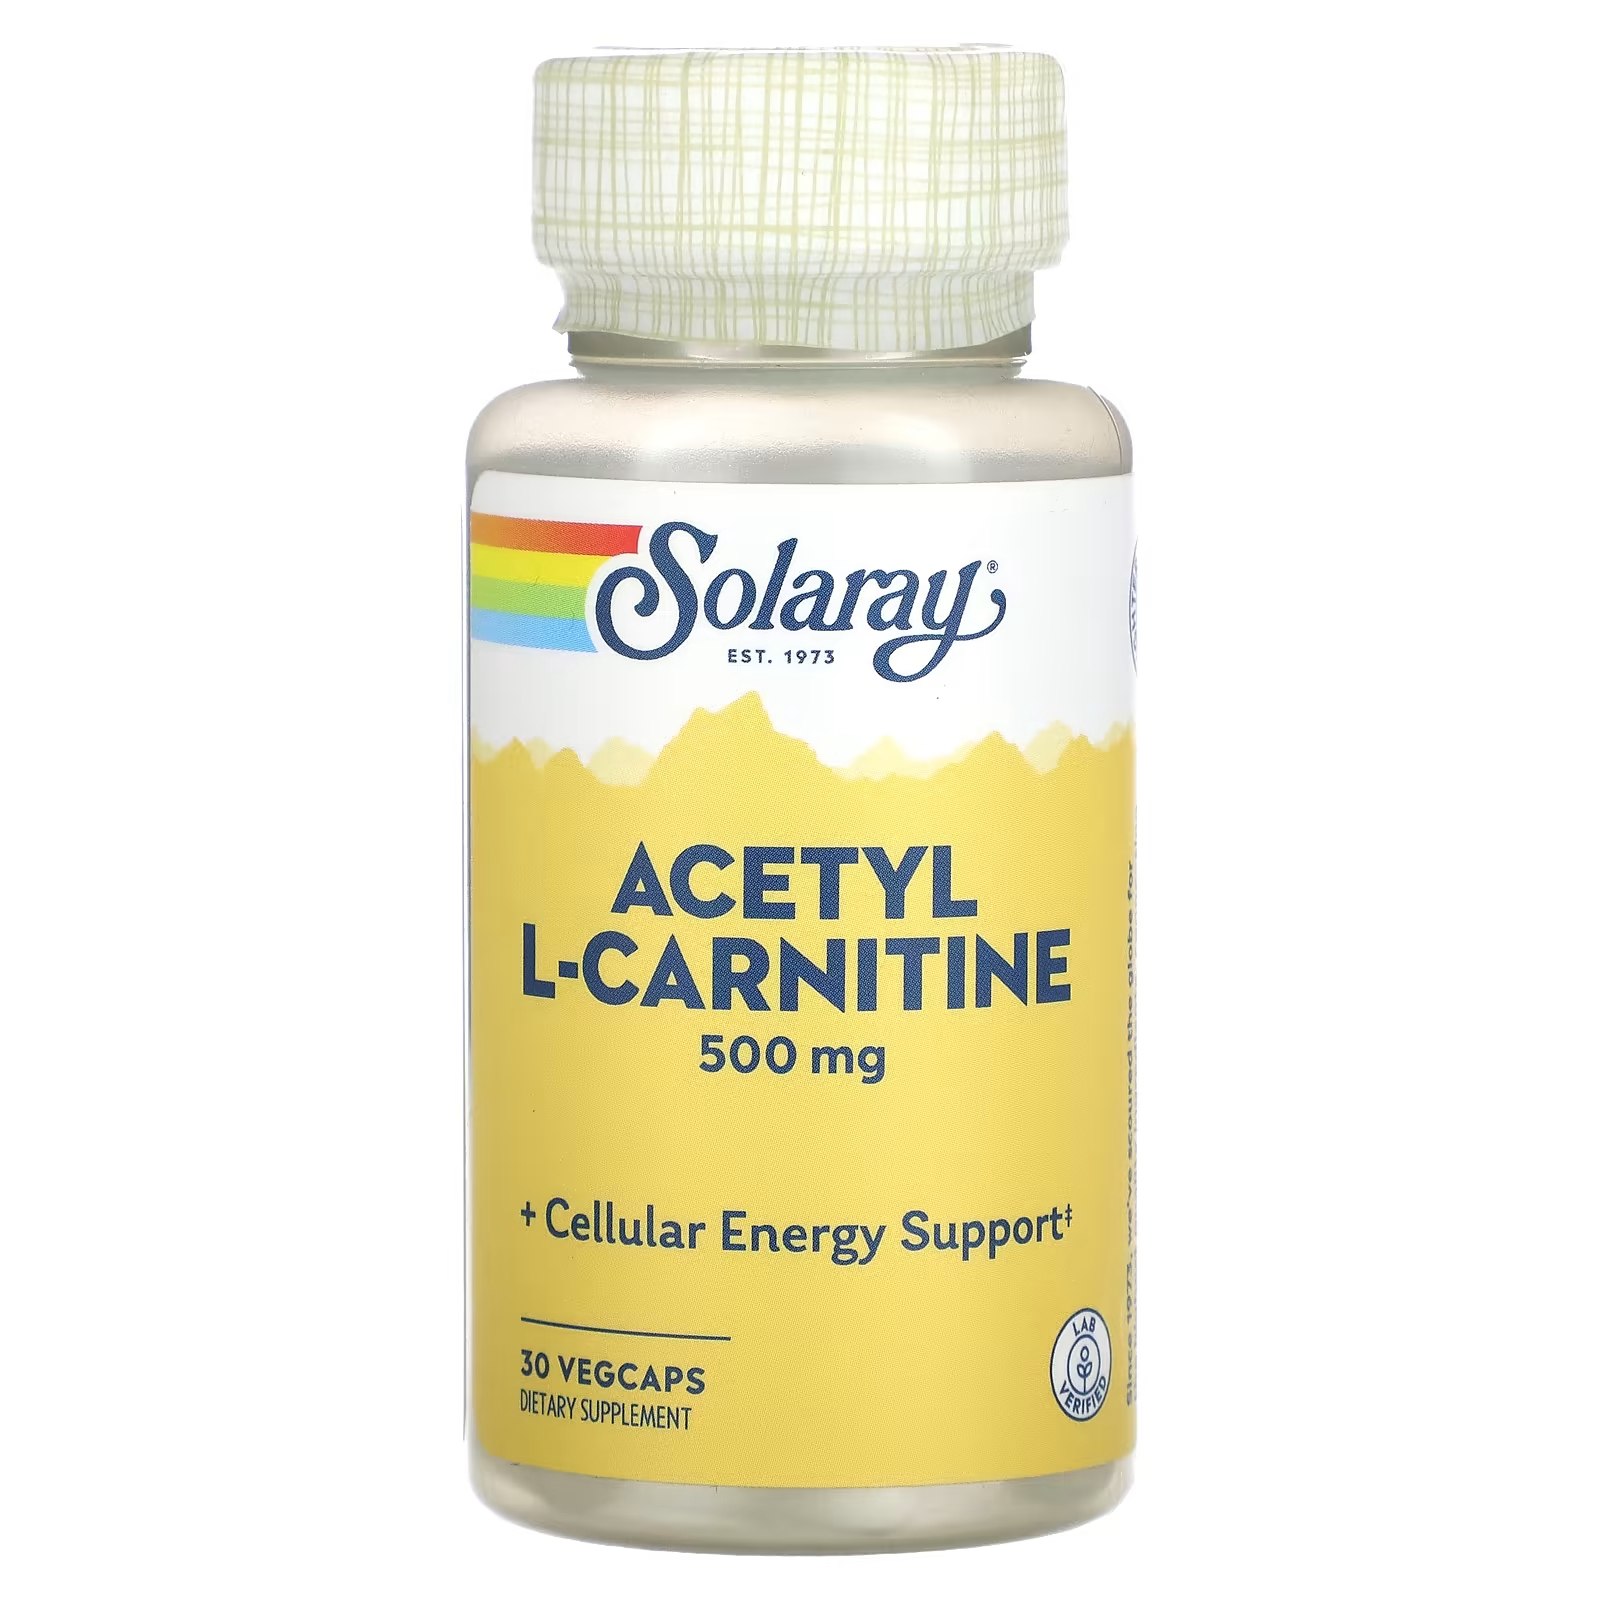 swanson acetyl l carnitine ацетил l карнитин 500 мг 100 вег капсул Ацетил-L-карнитин Solaray, 30 растительных капсул